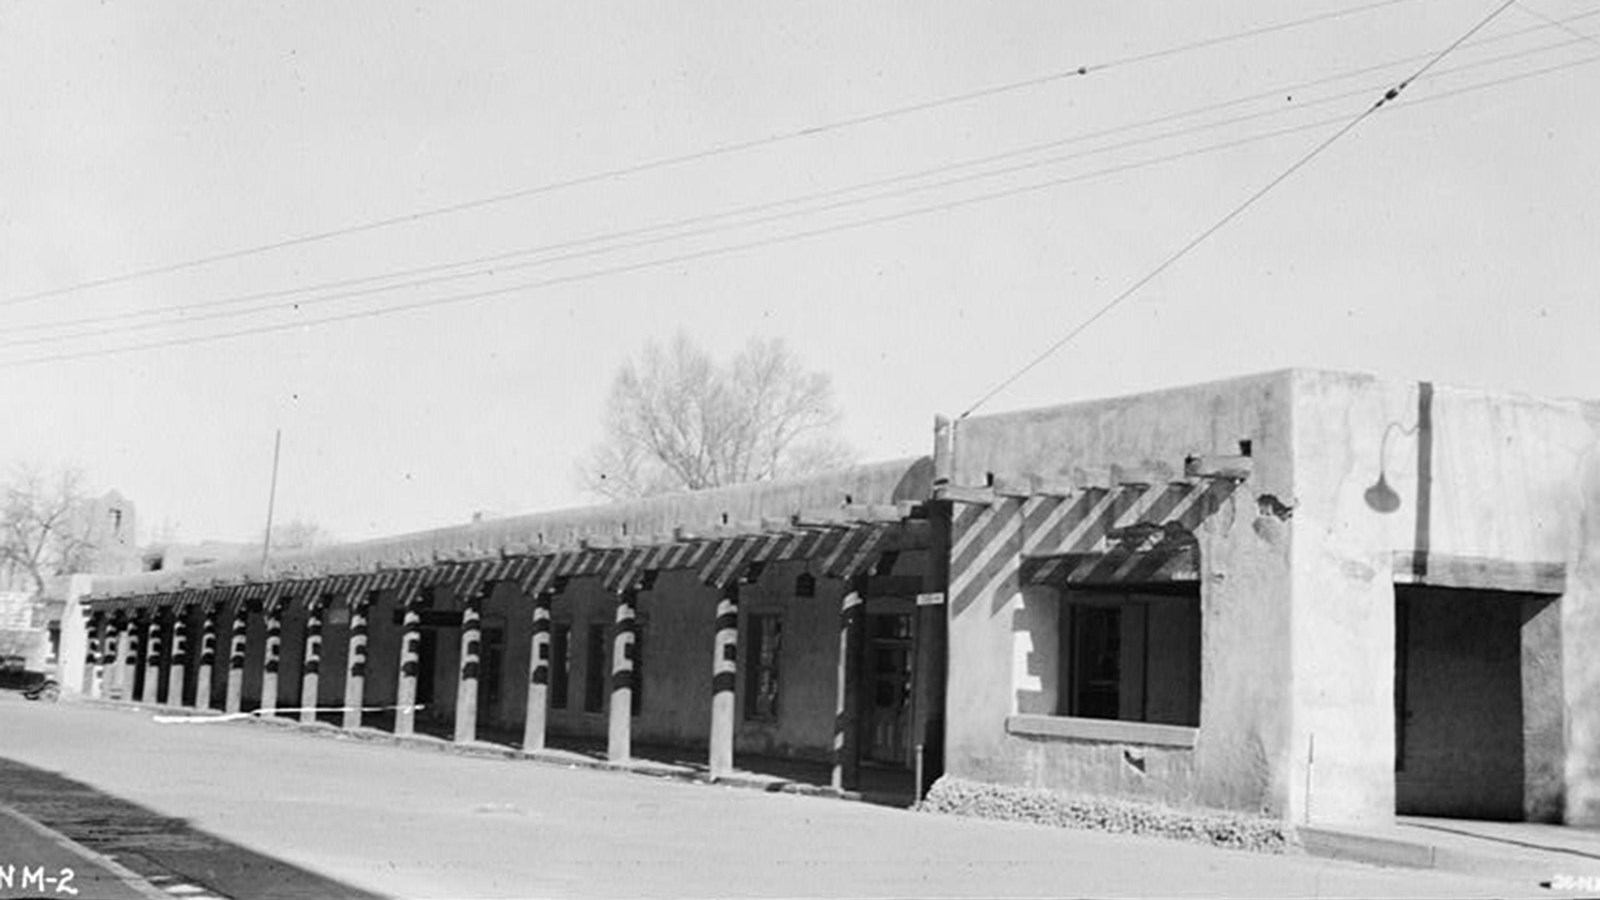 De Vargas Hotel (now Hotel Saint Francis) on Don Gaspar Street, Santa Fe,  NM - Palace of the Governors Photo Archives Collection - New Mexico's  Digital Collections